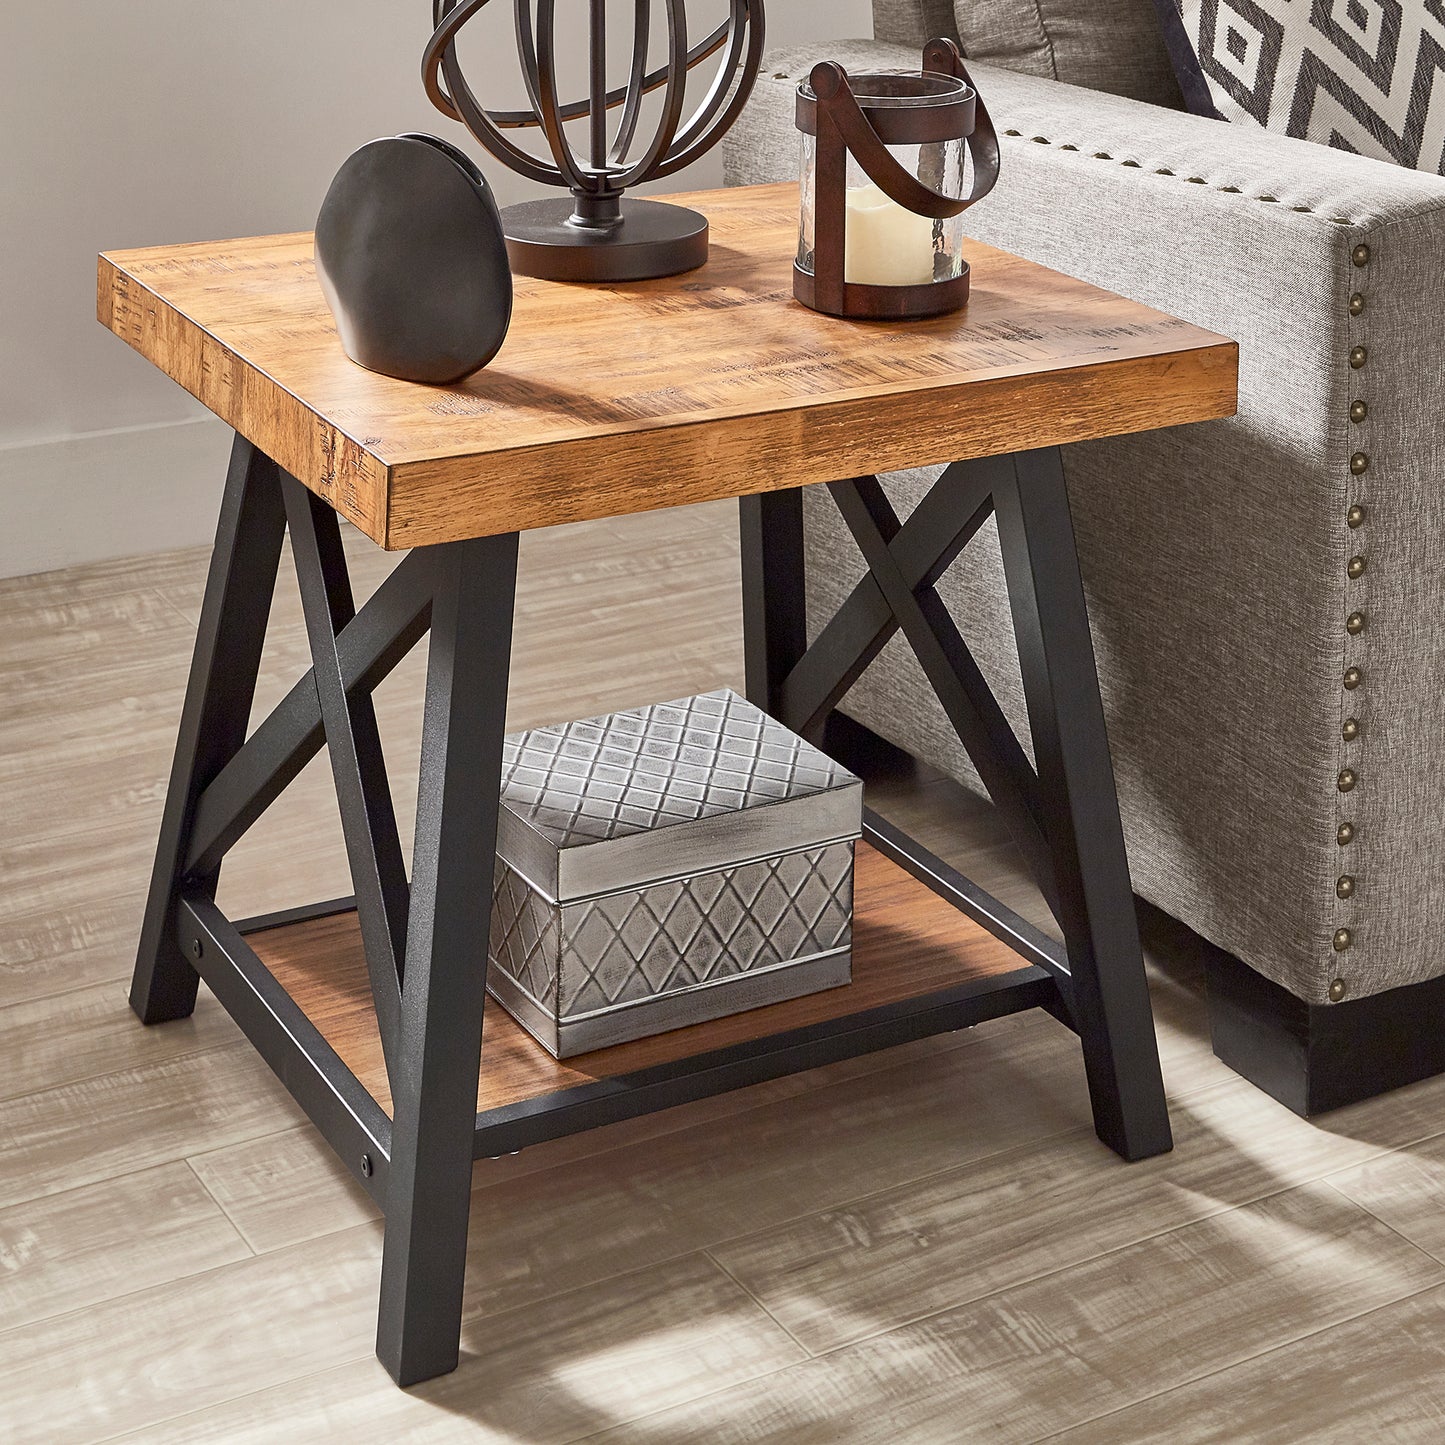 Rustic X-Base Accent Tables - Oak Finish, End Table, Coffee Table, and Sofa Table Set